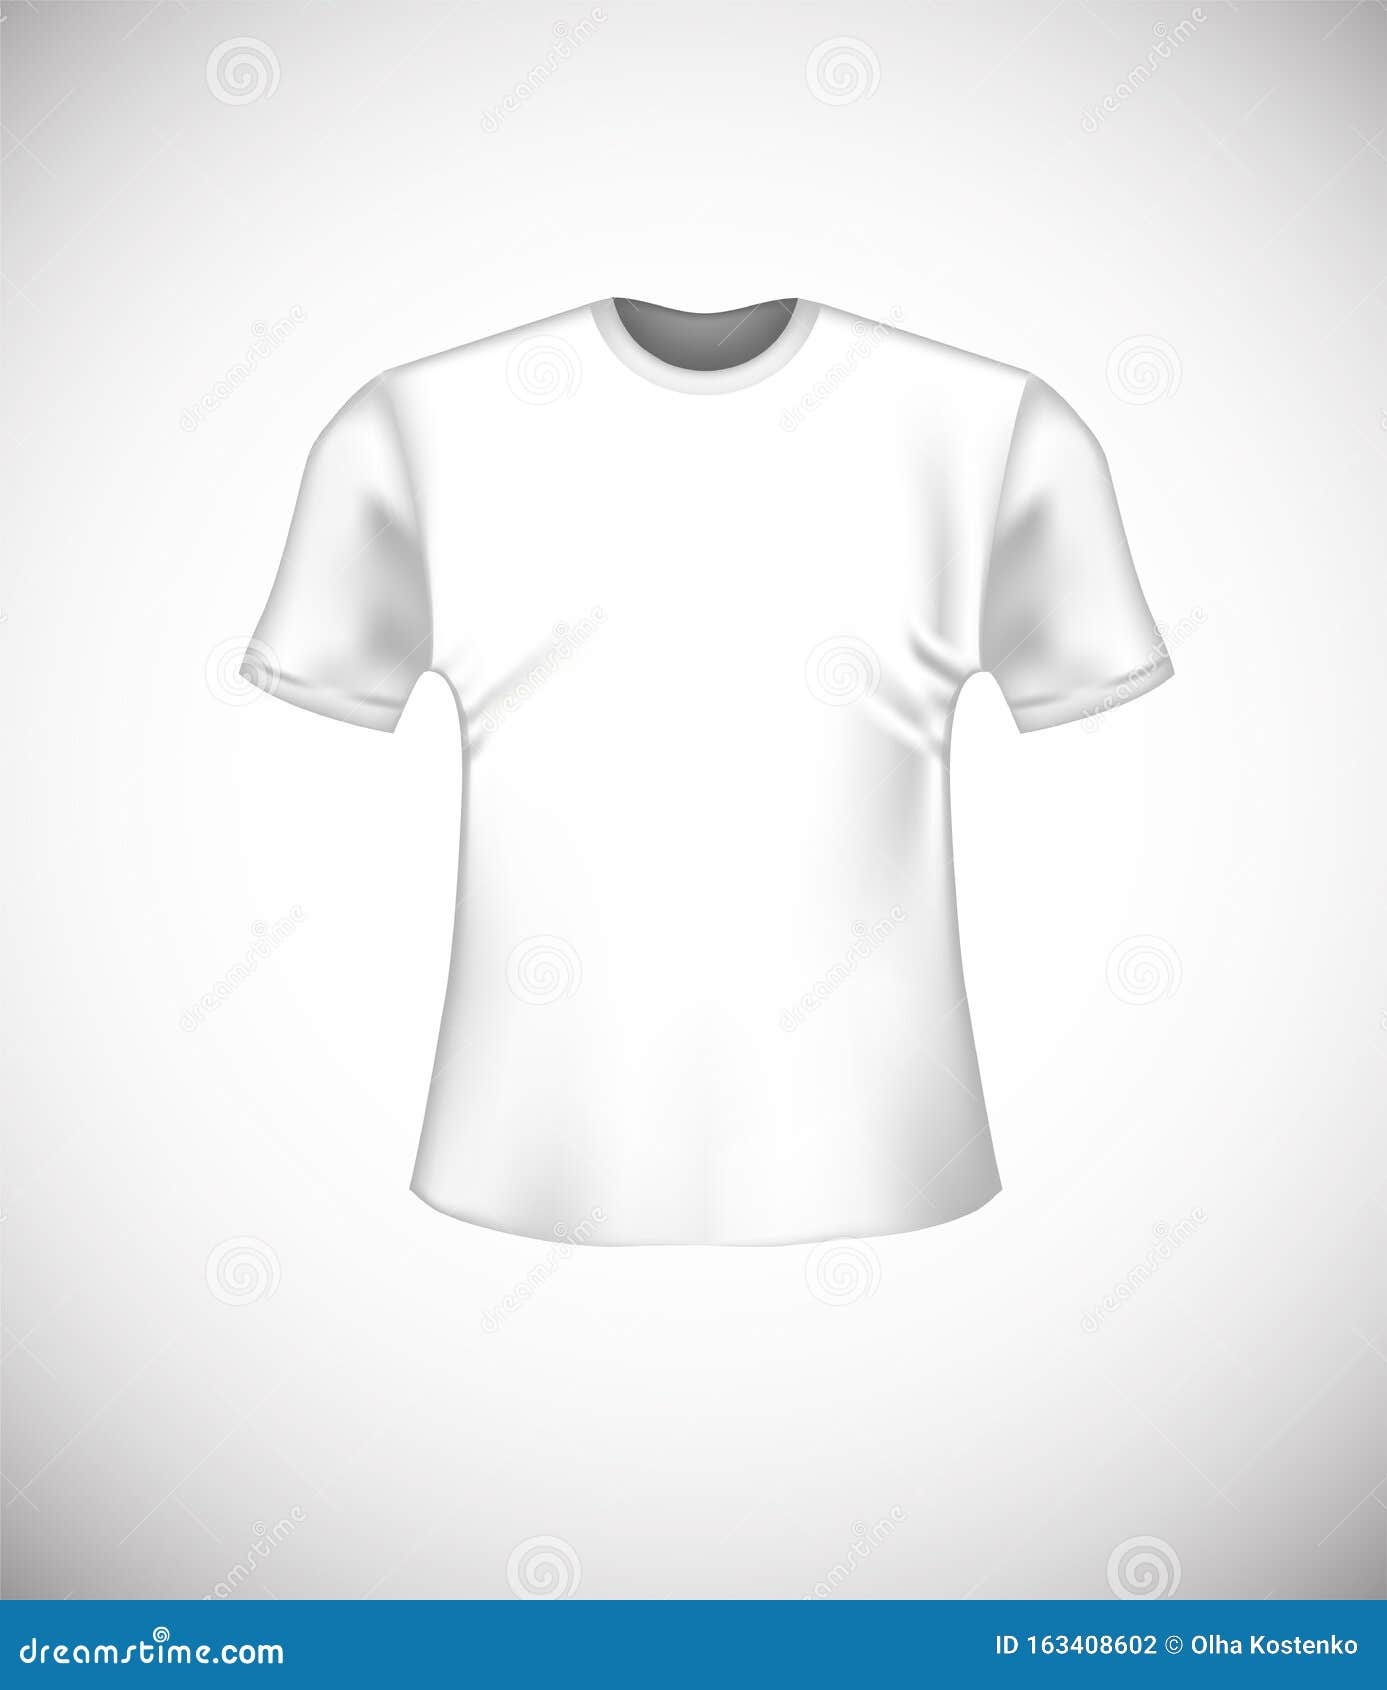 Download Isolated White, Black T-shirt Mockup Stock Vector ...